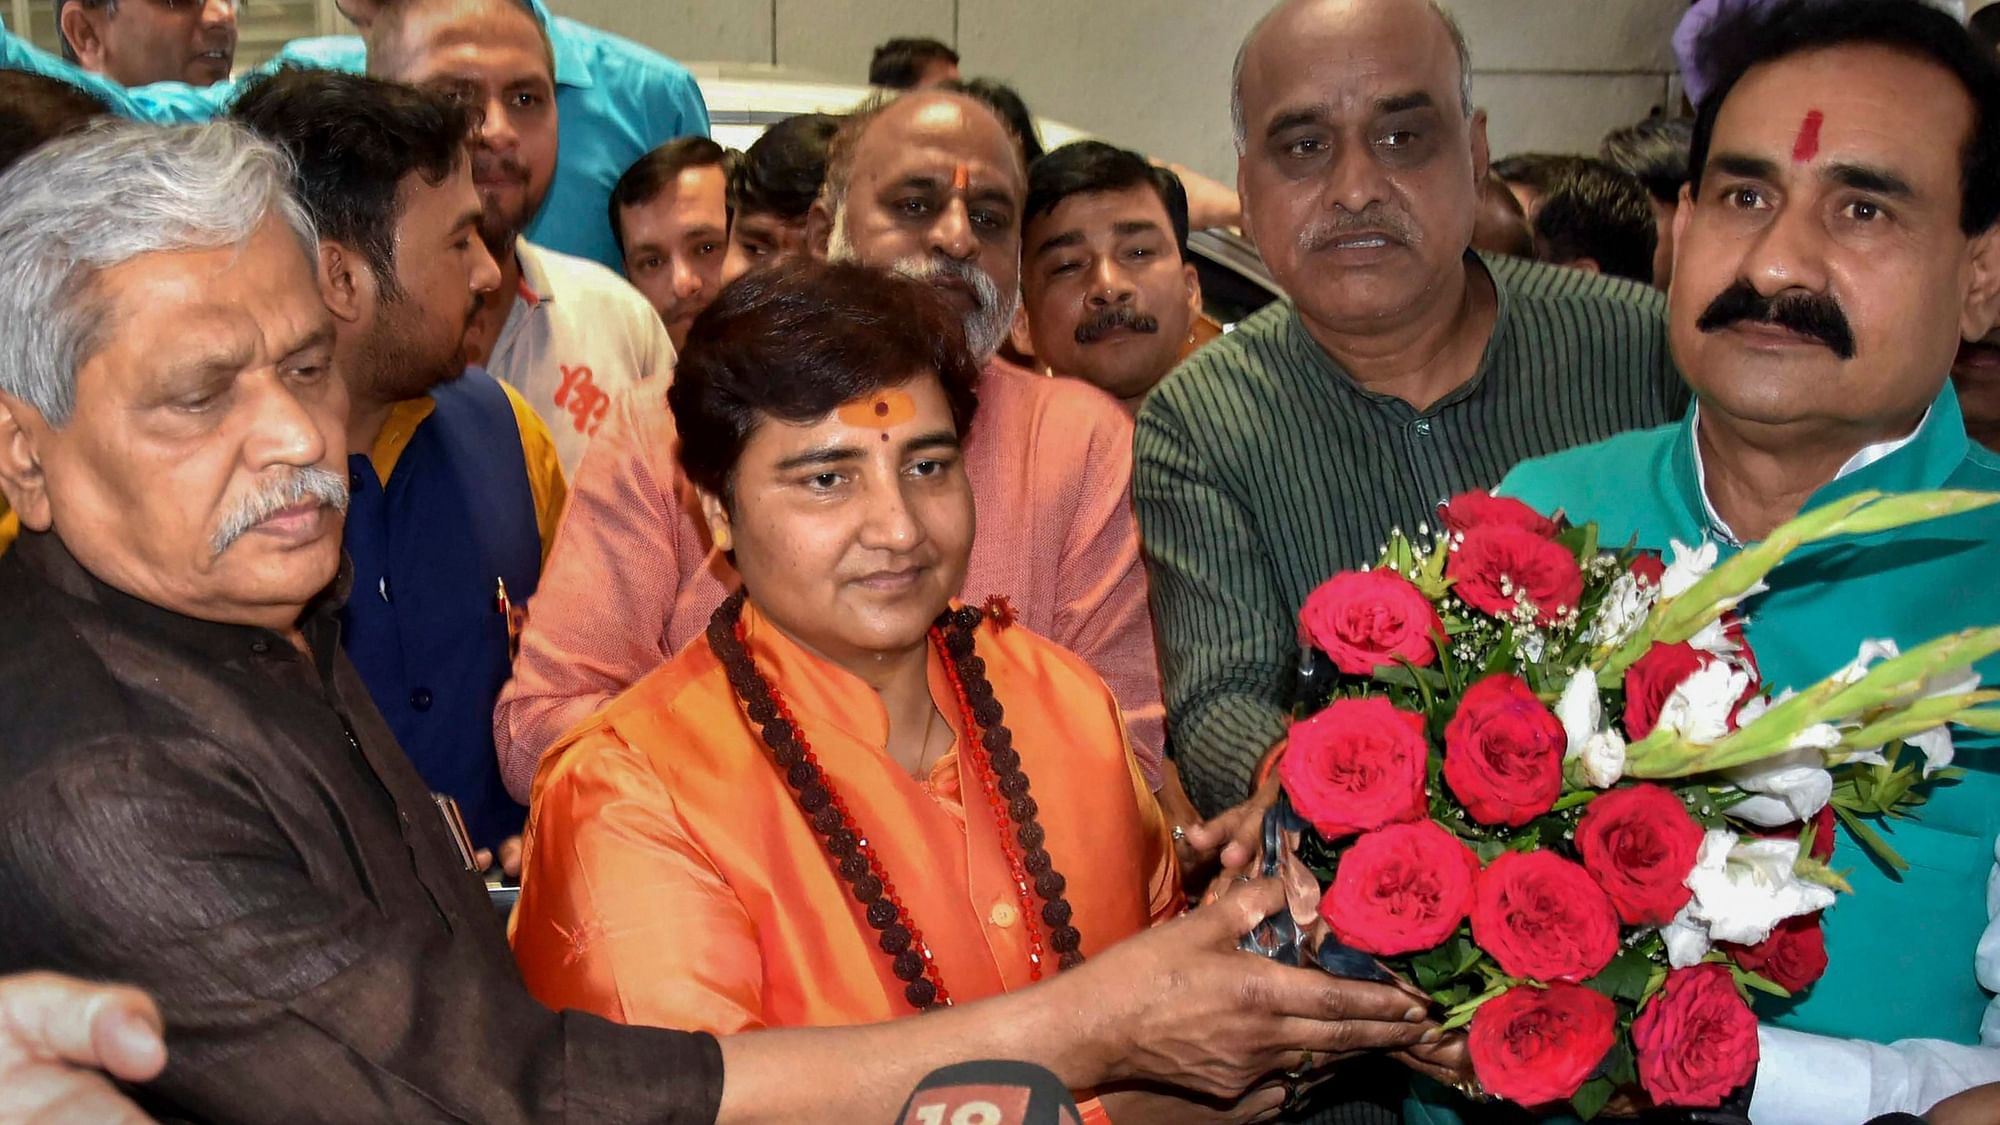 Sadhvi Pragya Thakur is under fire for saying that Karkare died in the 26/11 terror attack because she had cursed him.